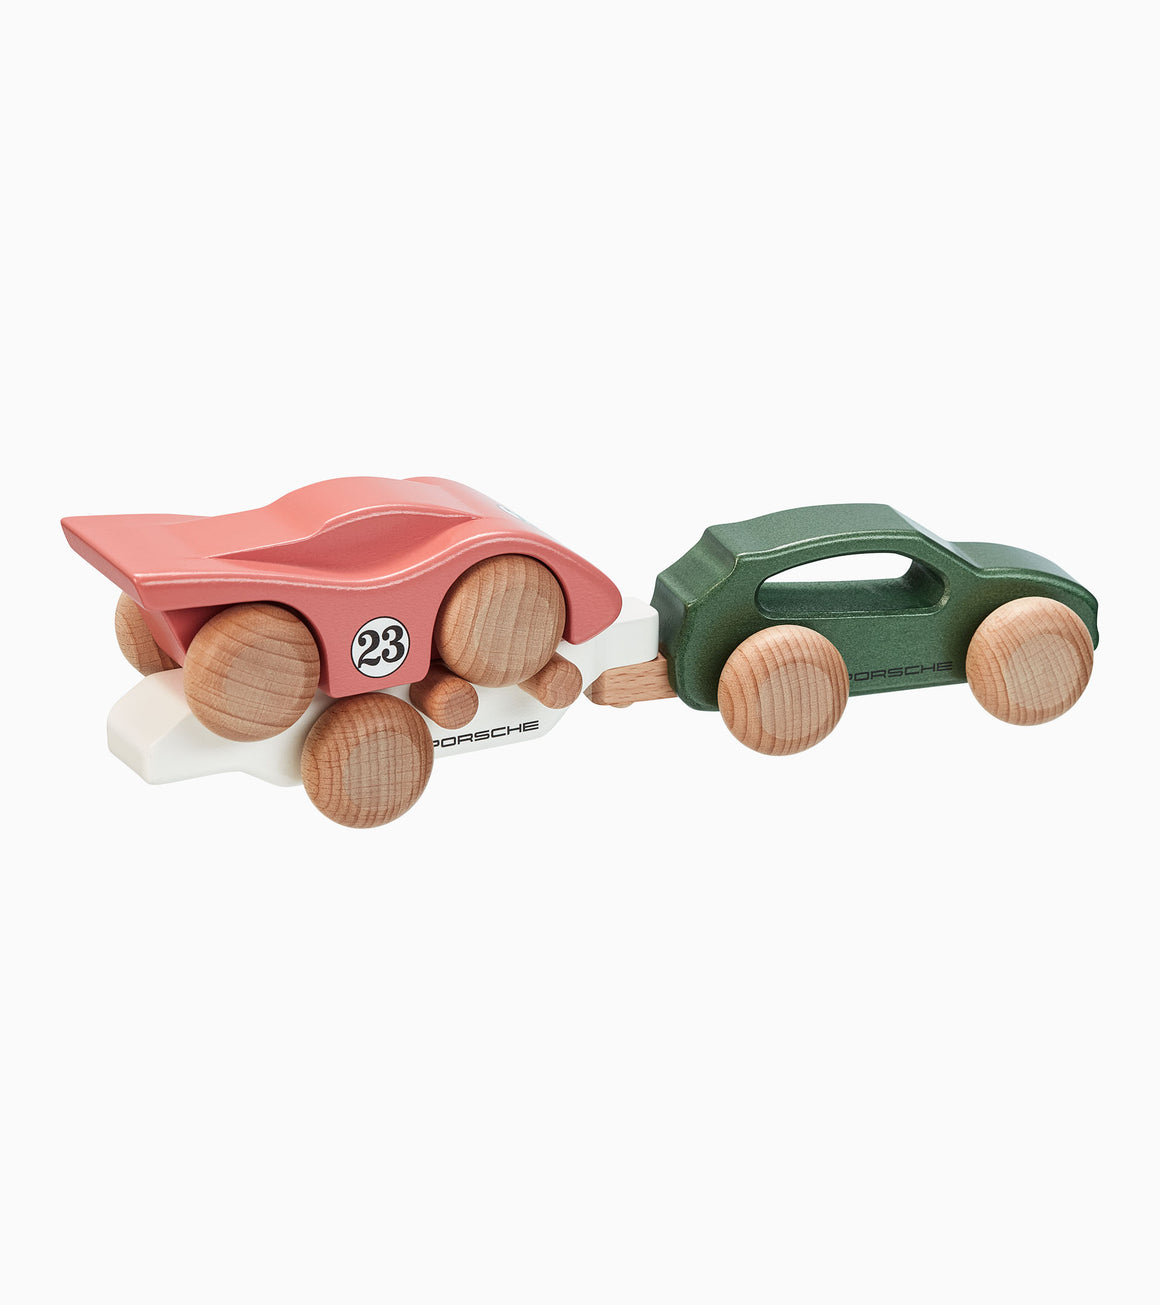 Macan wooden toy green & pink